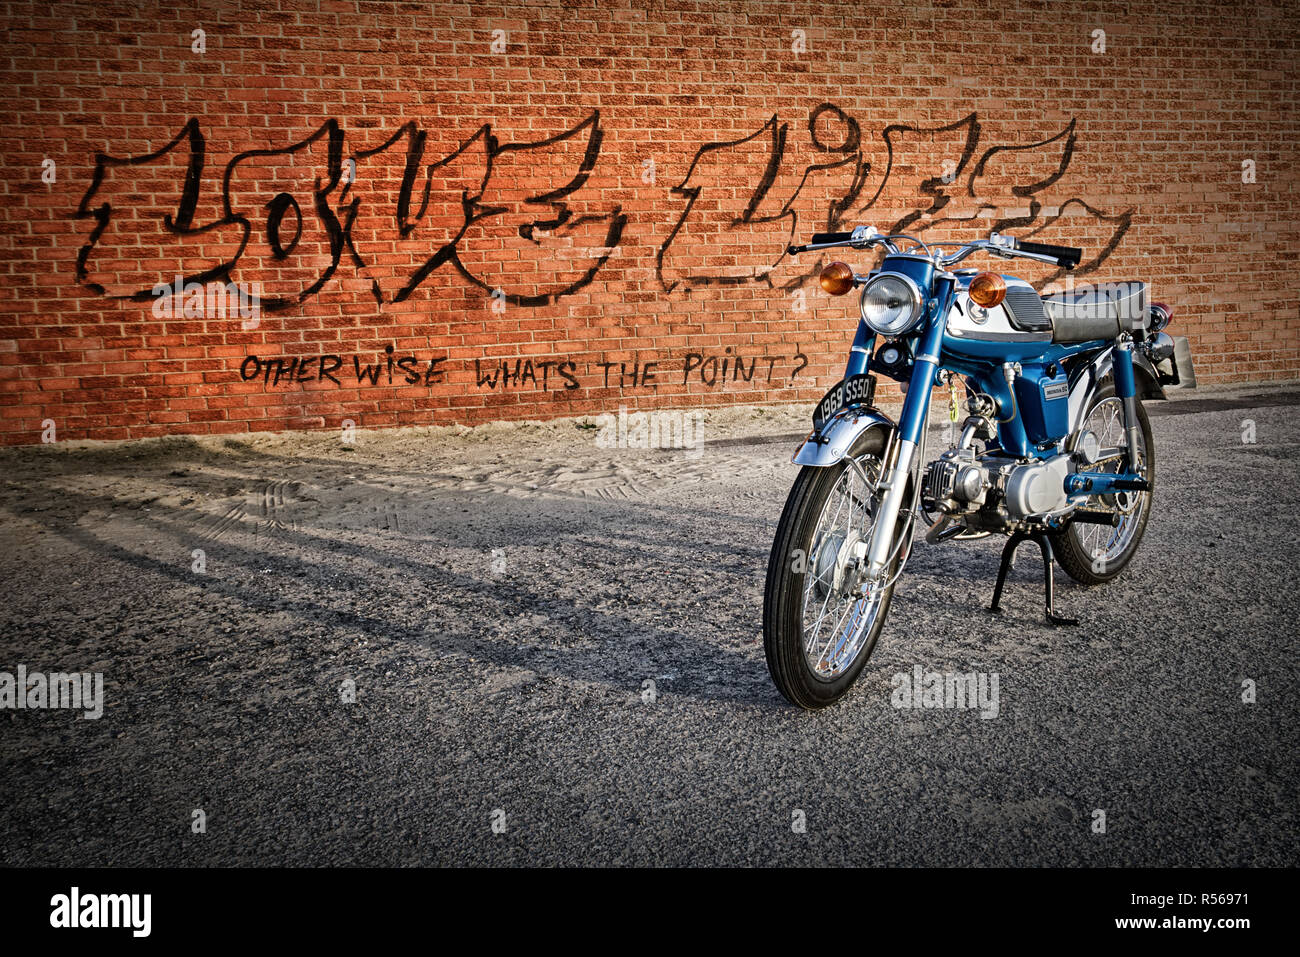 1969 Honda SS50 50cc classic moped or motorcycle Sixteener special with background graffiti on a wall quote love life otherwise whats the point! Stock Photo